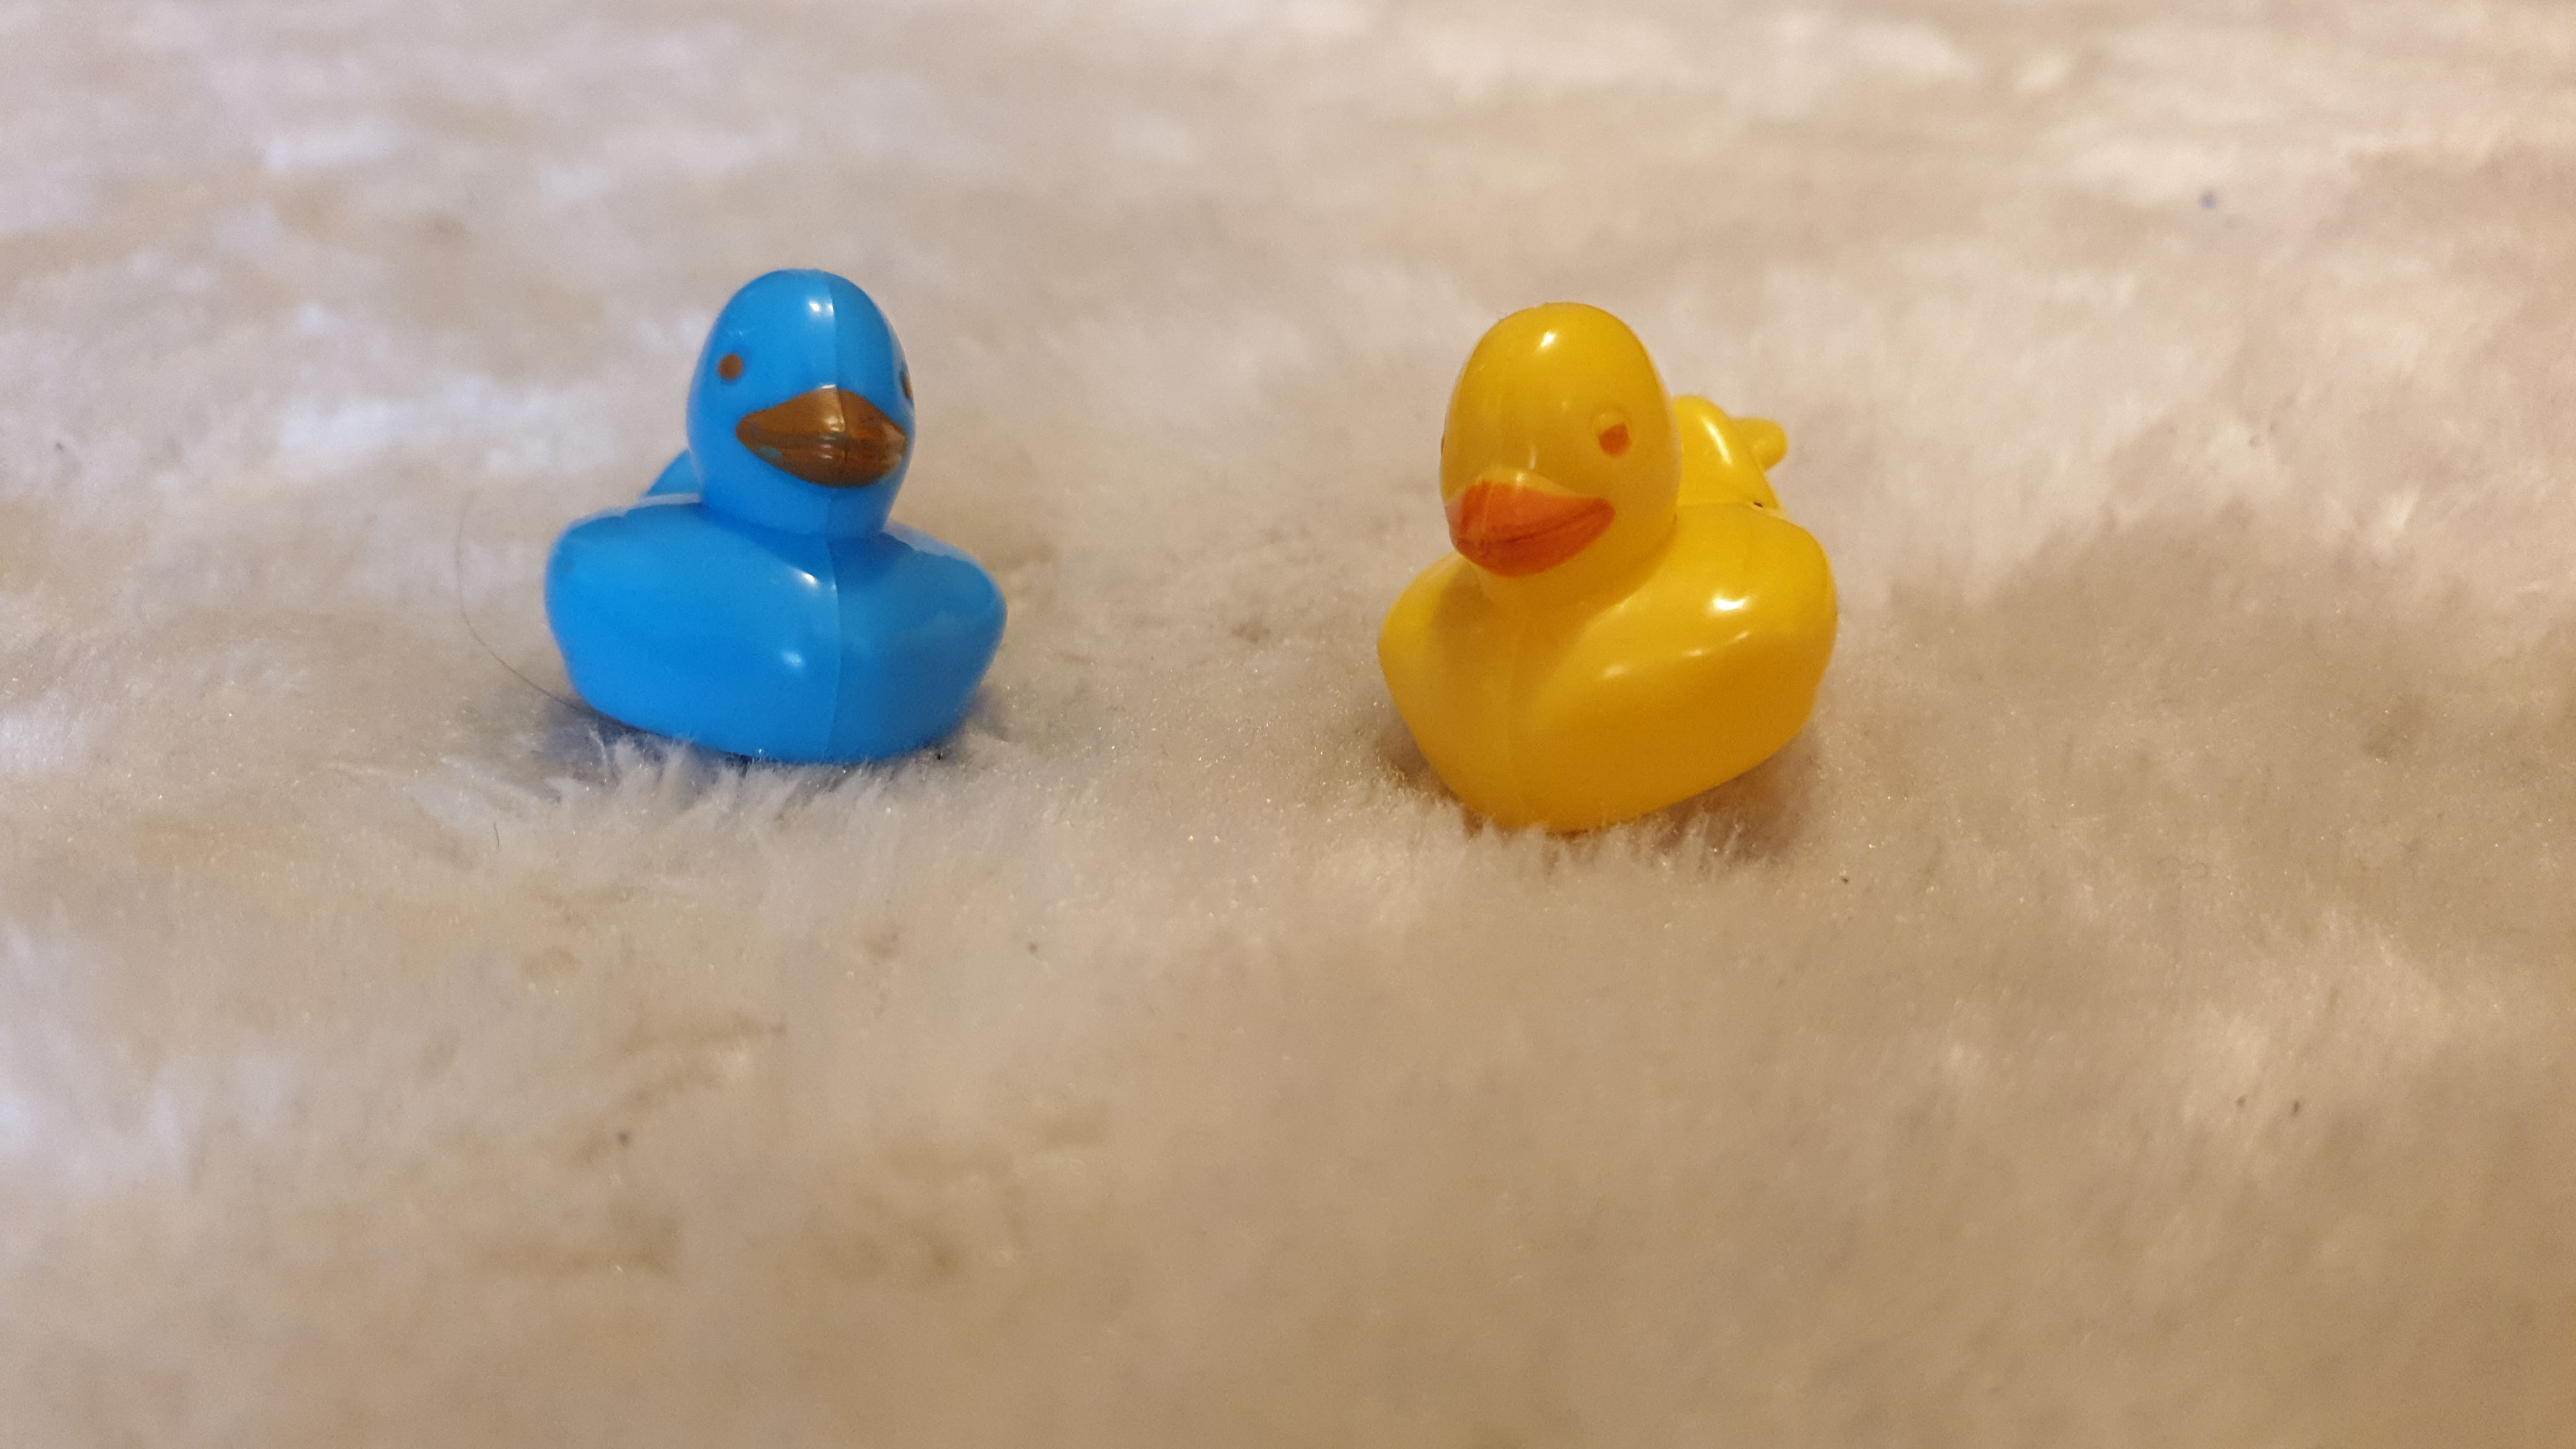 Two small plastic ducks; one blue, one yellow.